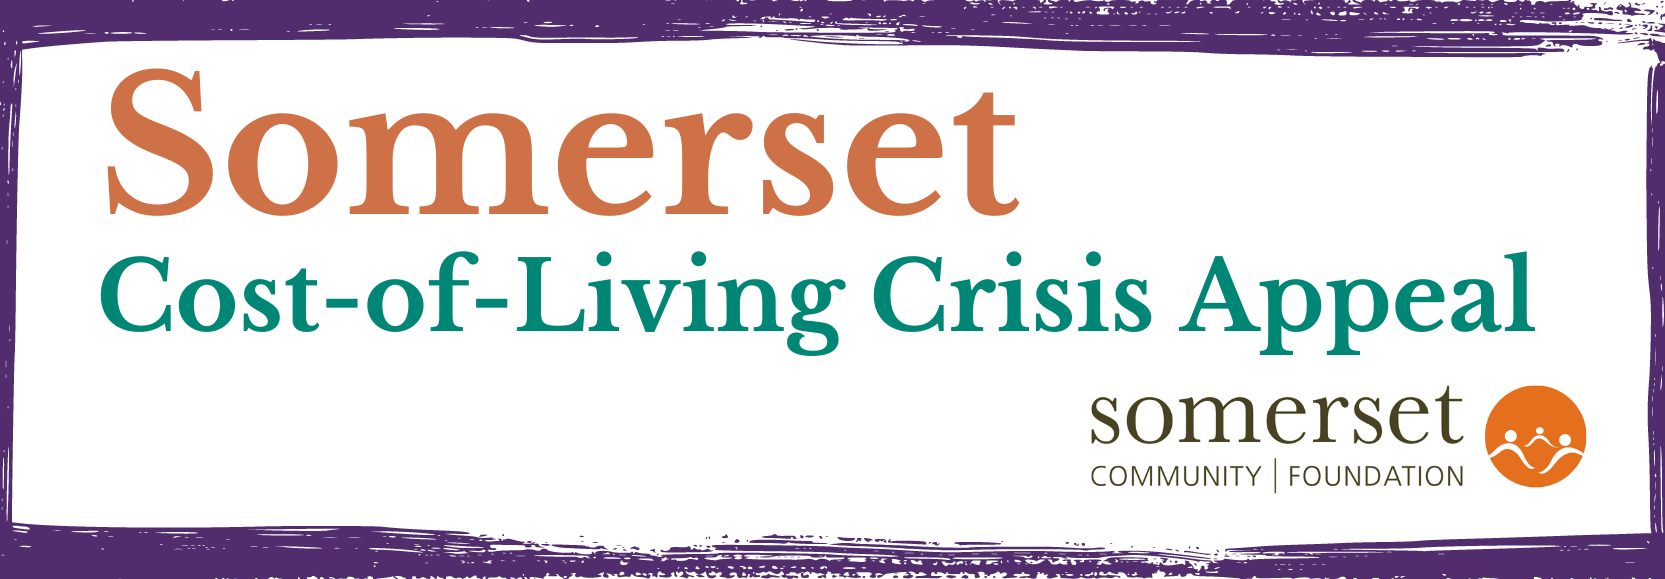 Our communities are facing a cost-of-living crisis.